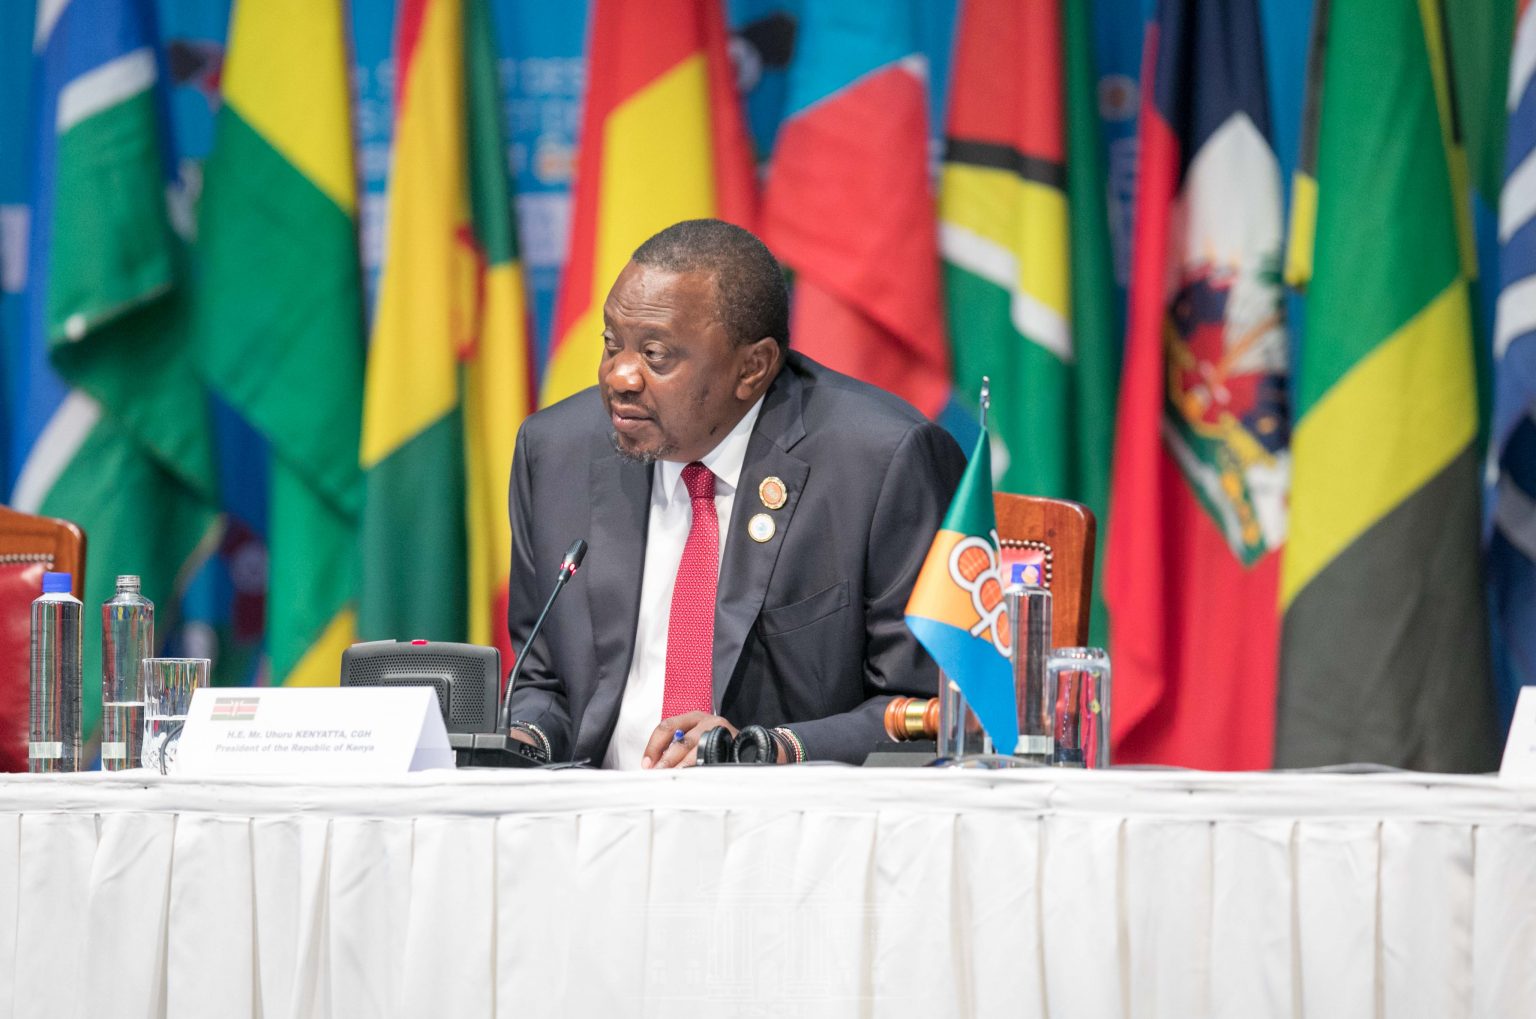 Africa, Caribbean and Pacific (ACP) group of nations will strongly defend multilateral trading systems in order to protect themselves from unfair trade practices, its secretariat has said.